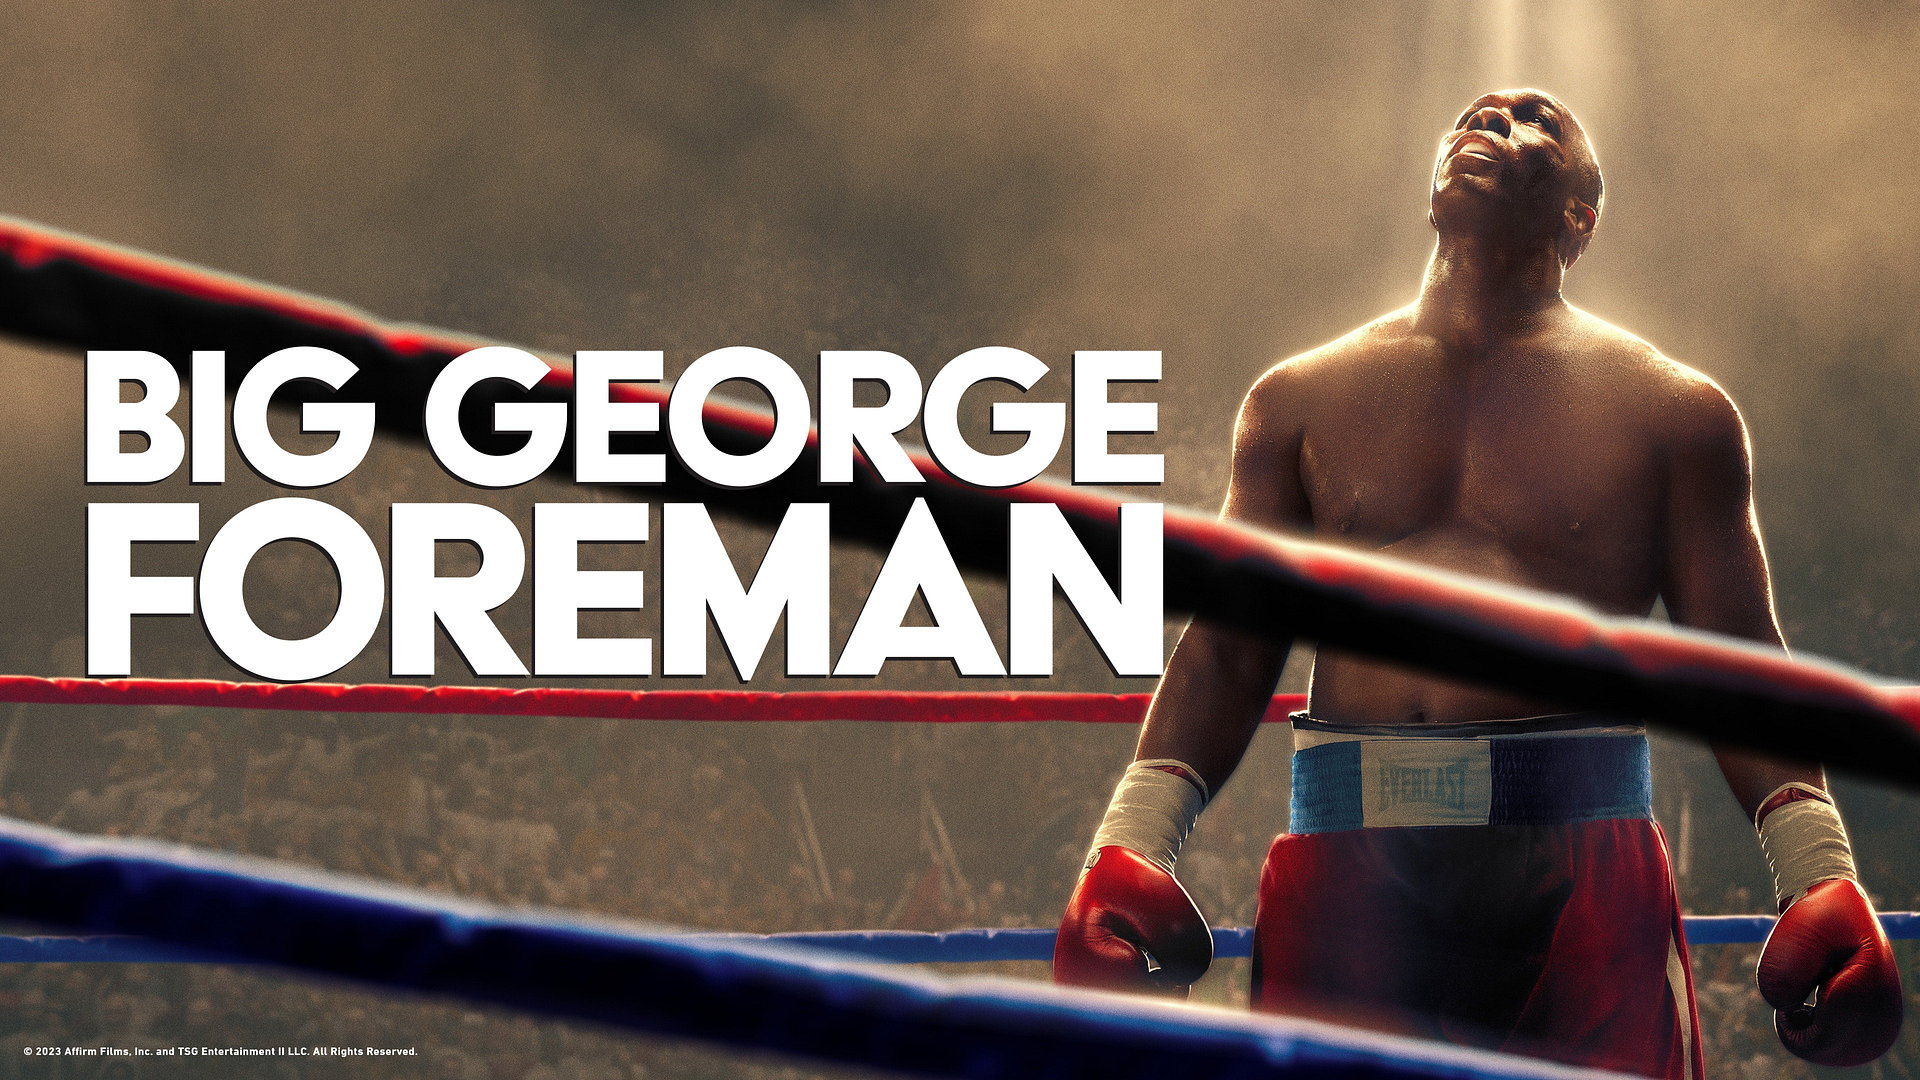 Big George Foreman: The Miraculous Story of the Once and Future Heavyweight Champion of the World